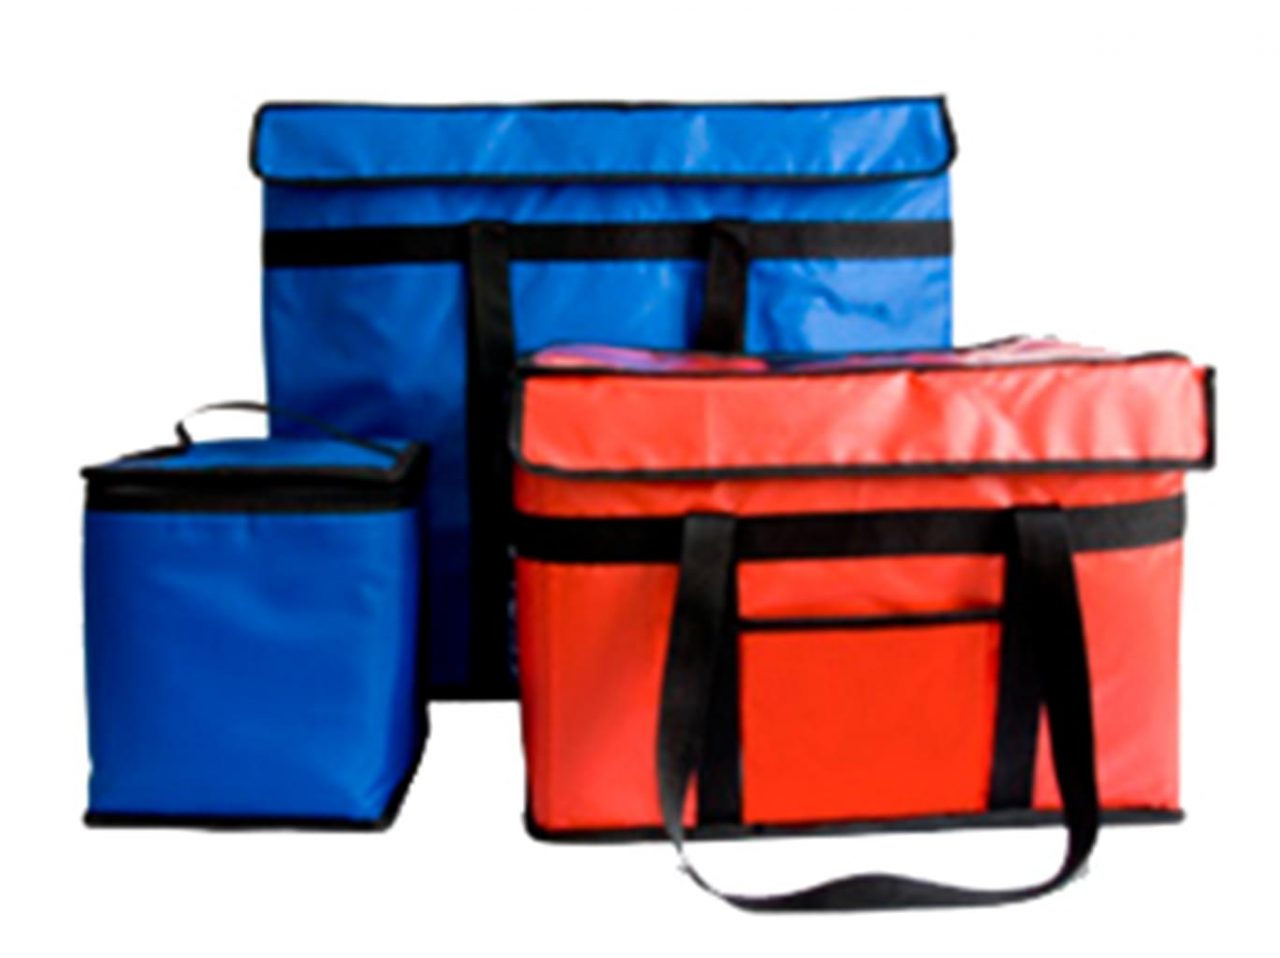 tempack-patient-bags-covers-reusable-packaging-1@2x-1280x958